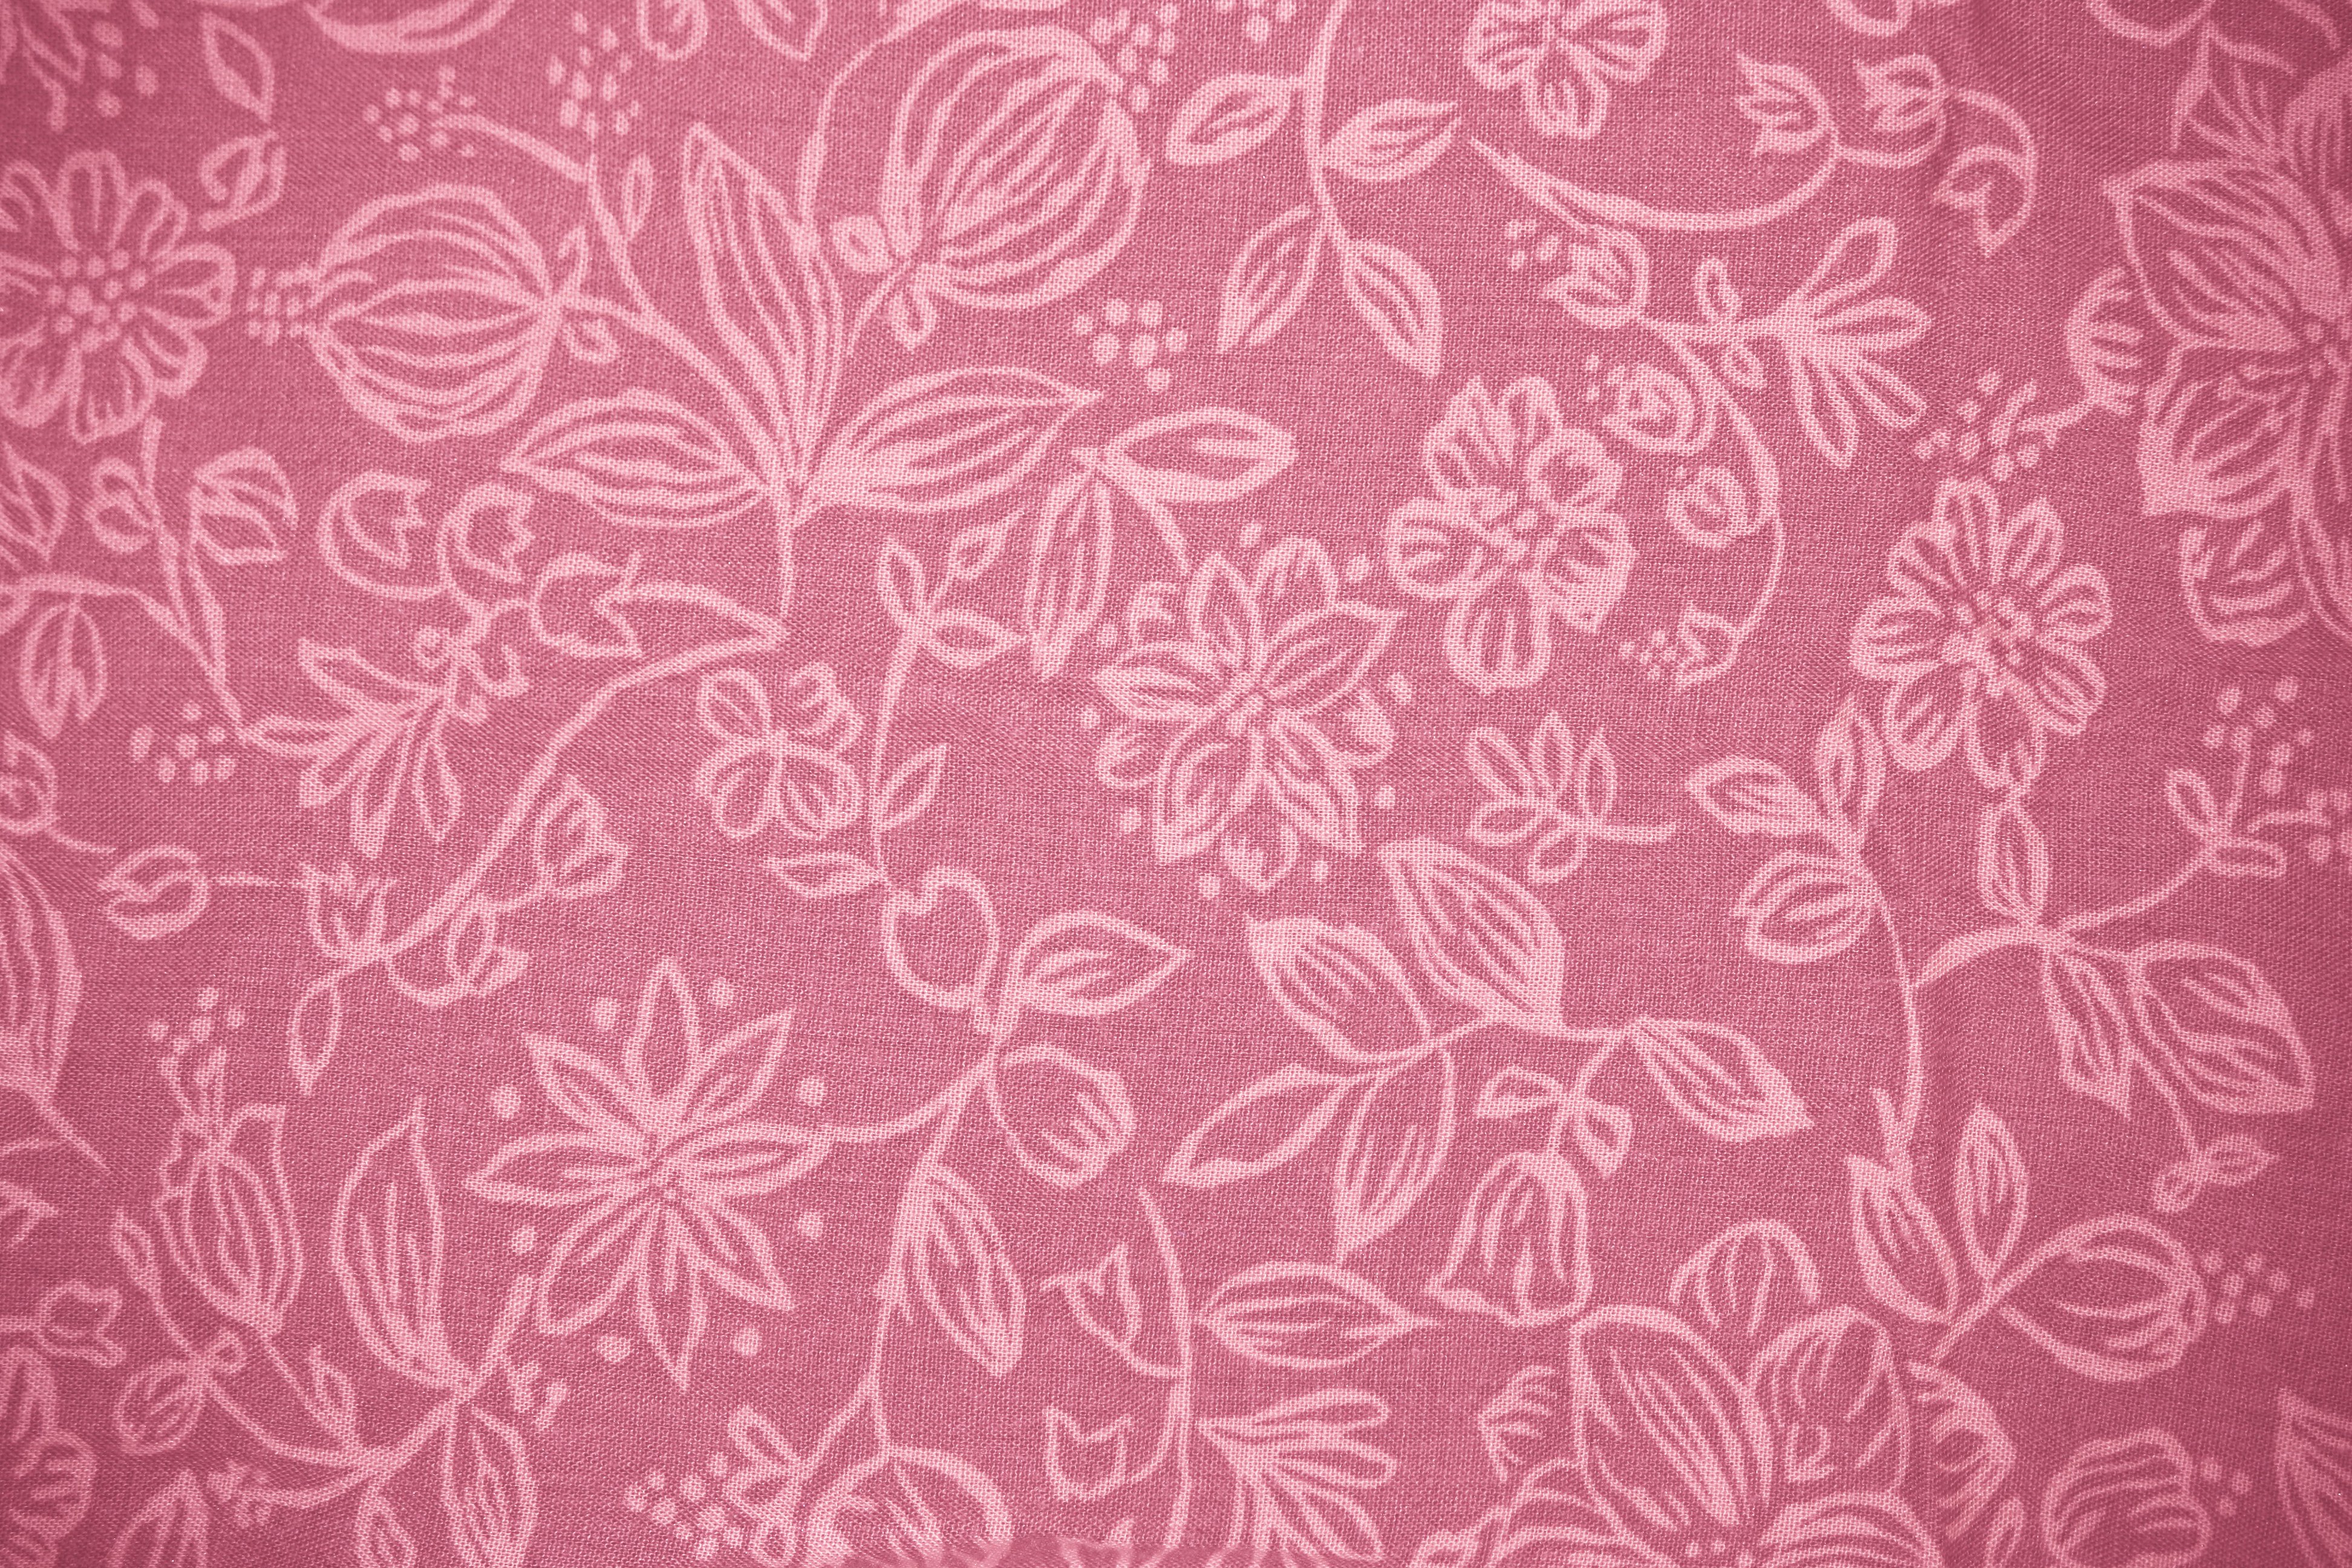 Coral Colored Fabric with Floral Pattern Texture Picture | Free ...